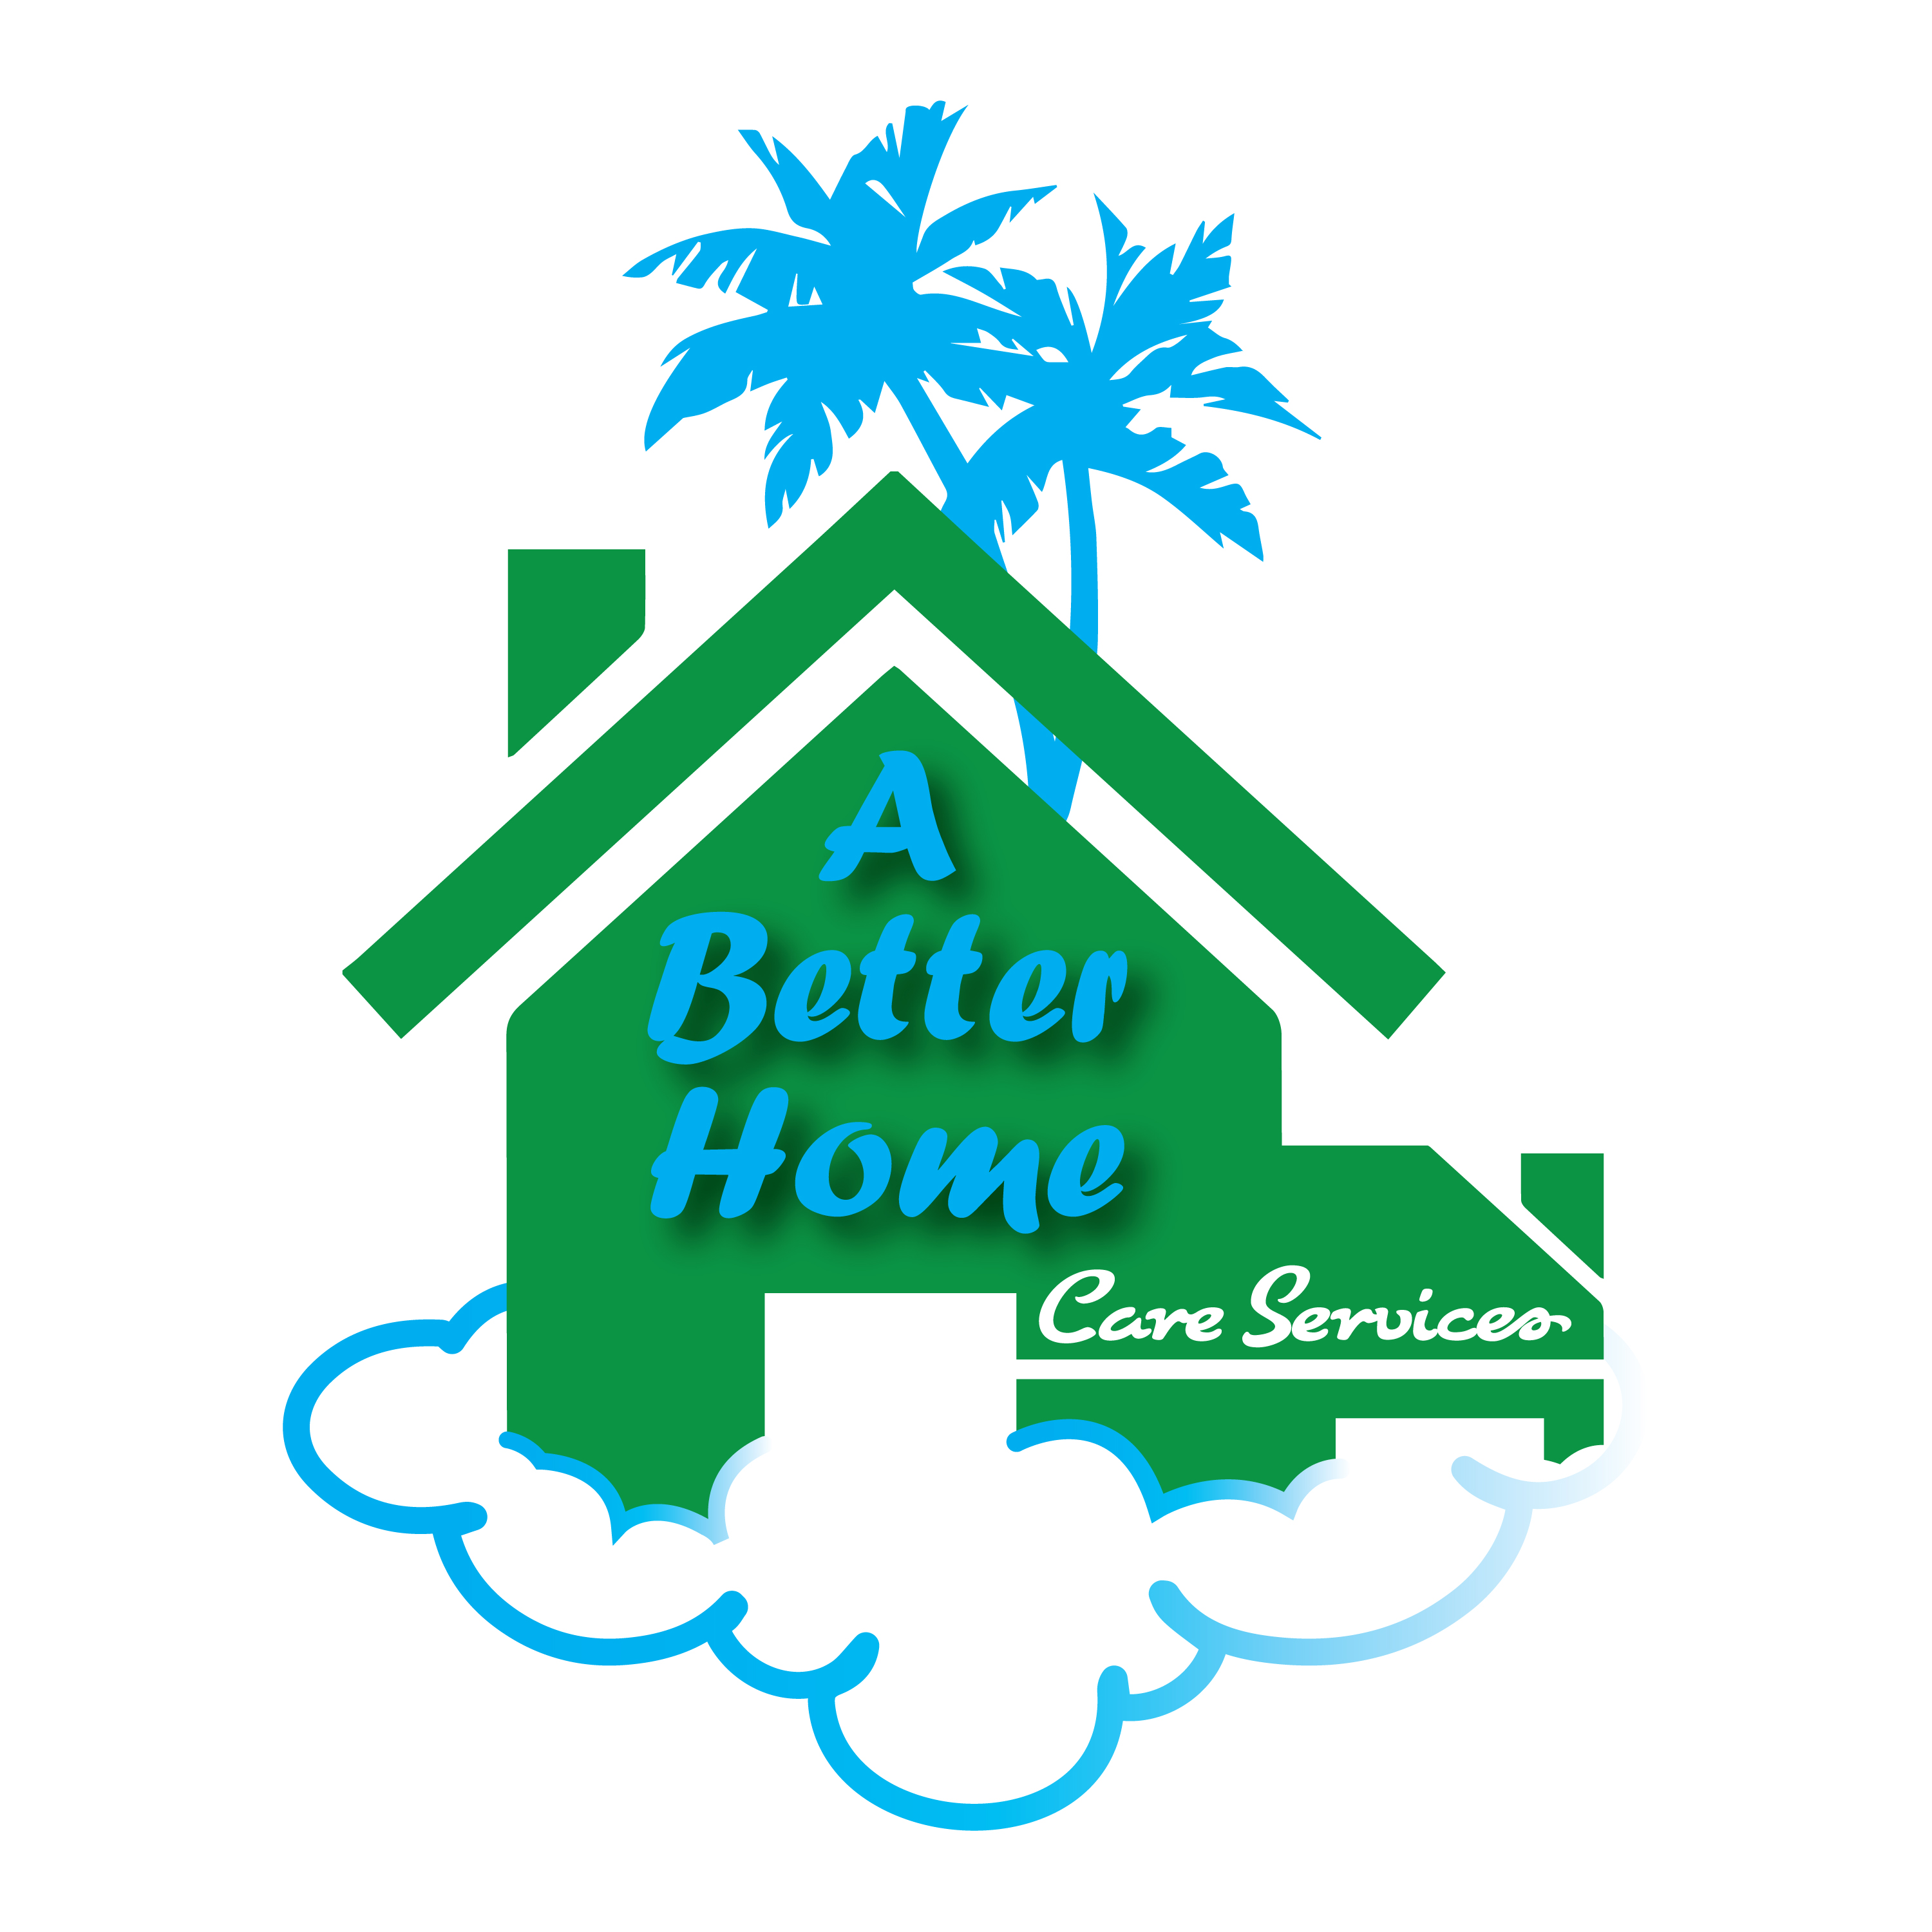 A Better Home Care Agency